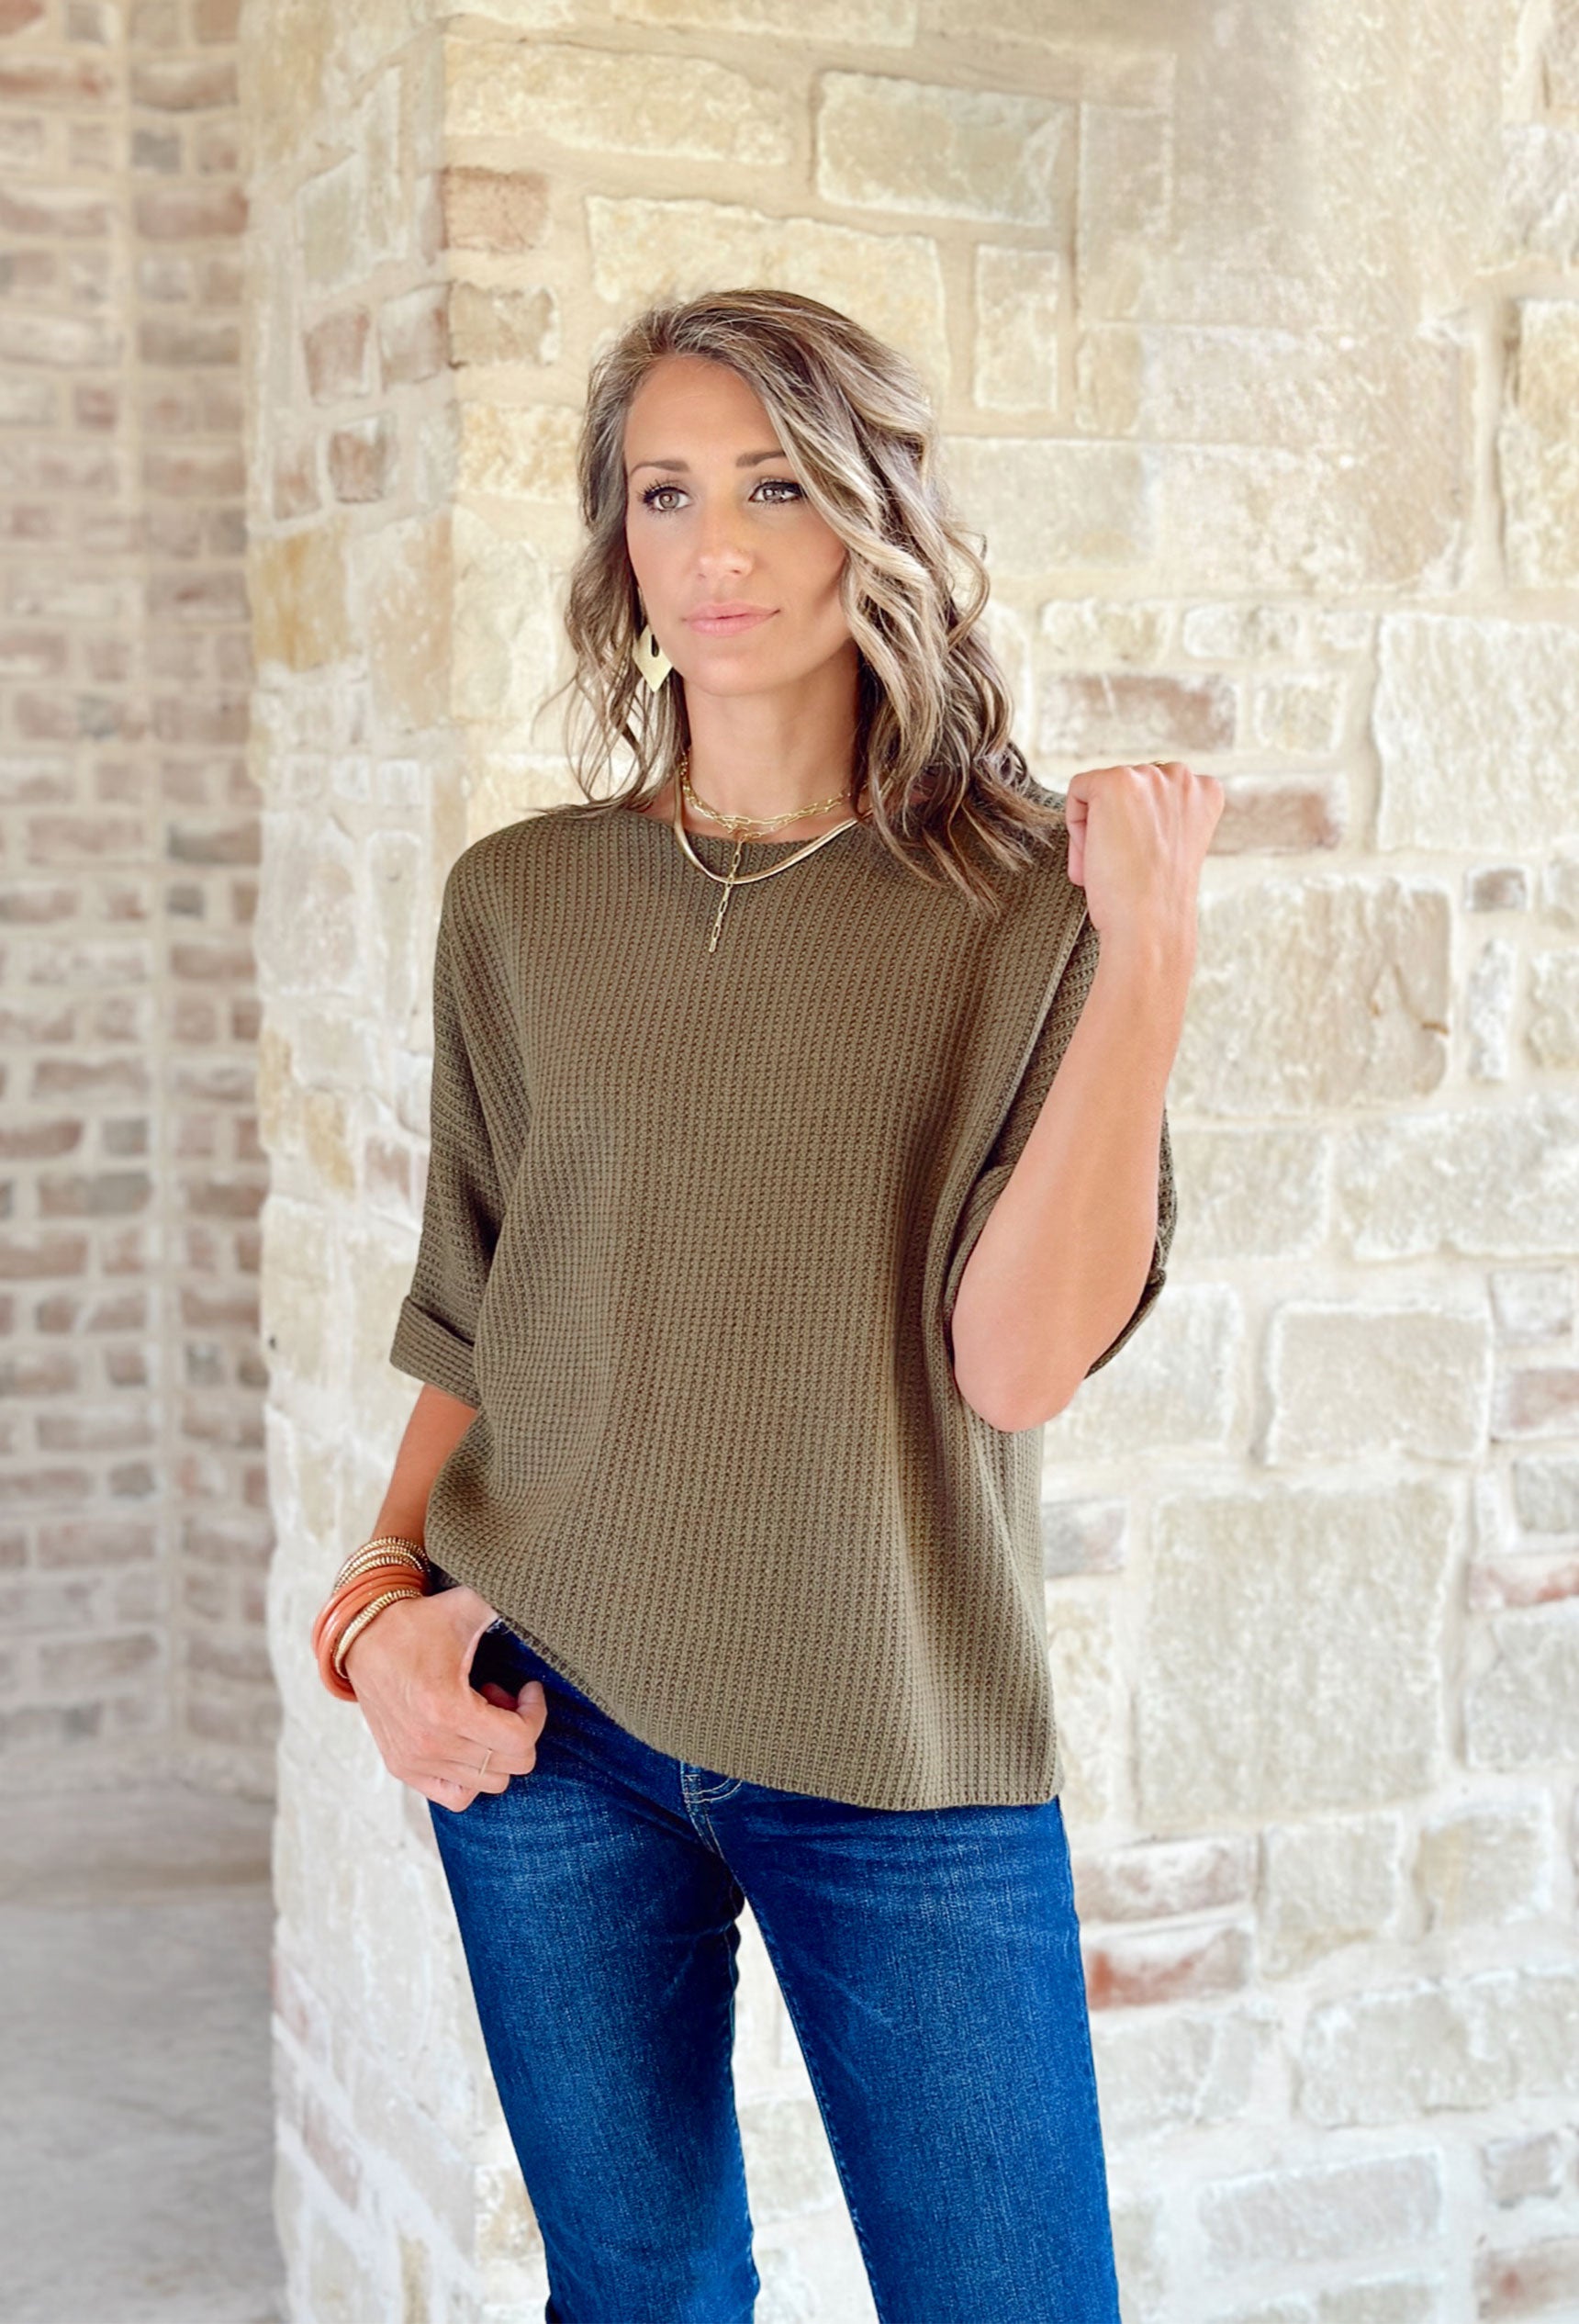 Boston Market Sweater in Olive, waffle knit short sleeve sweater top with folded sleeves 